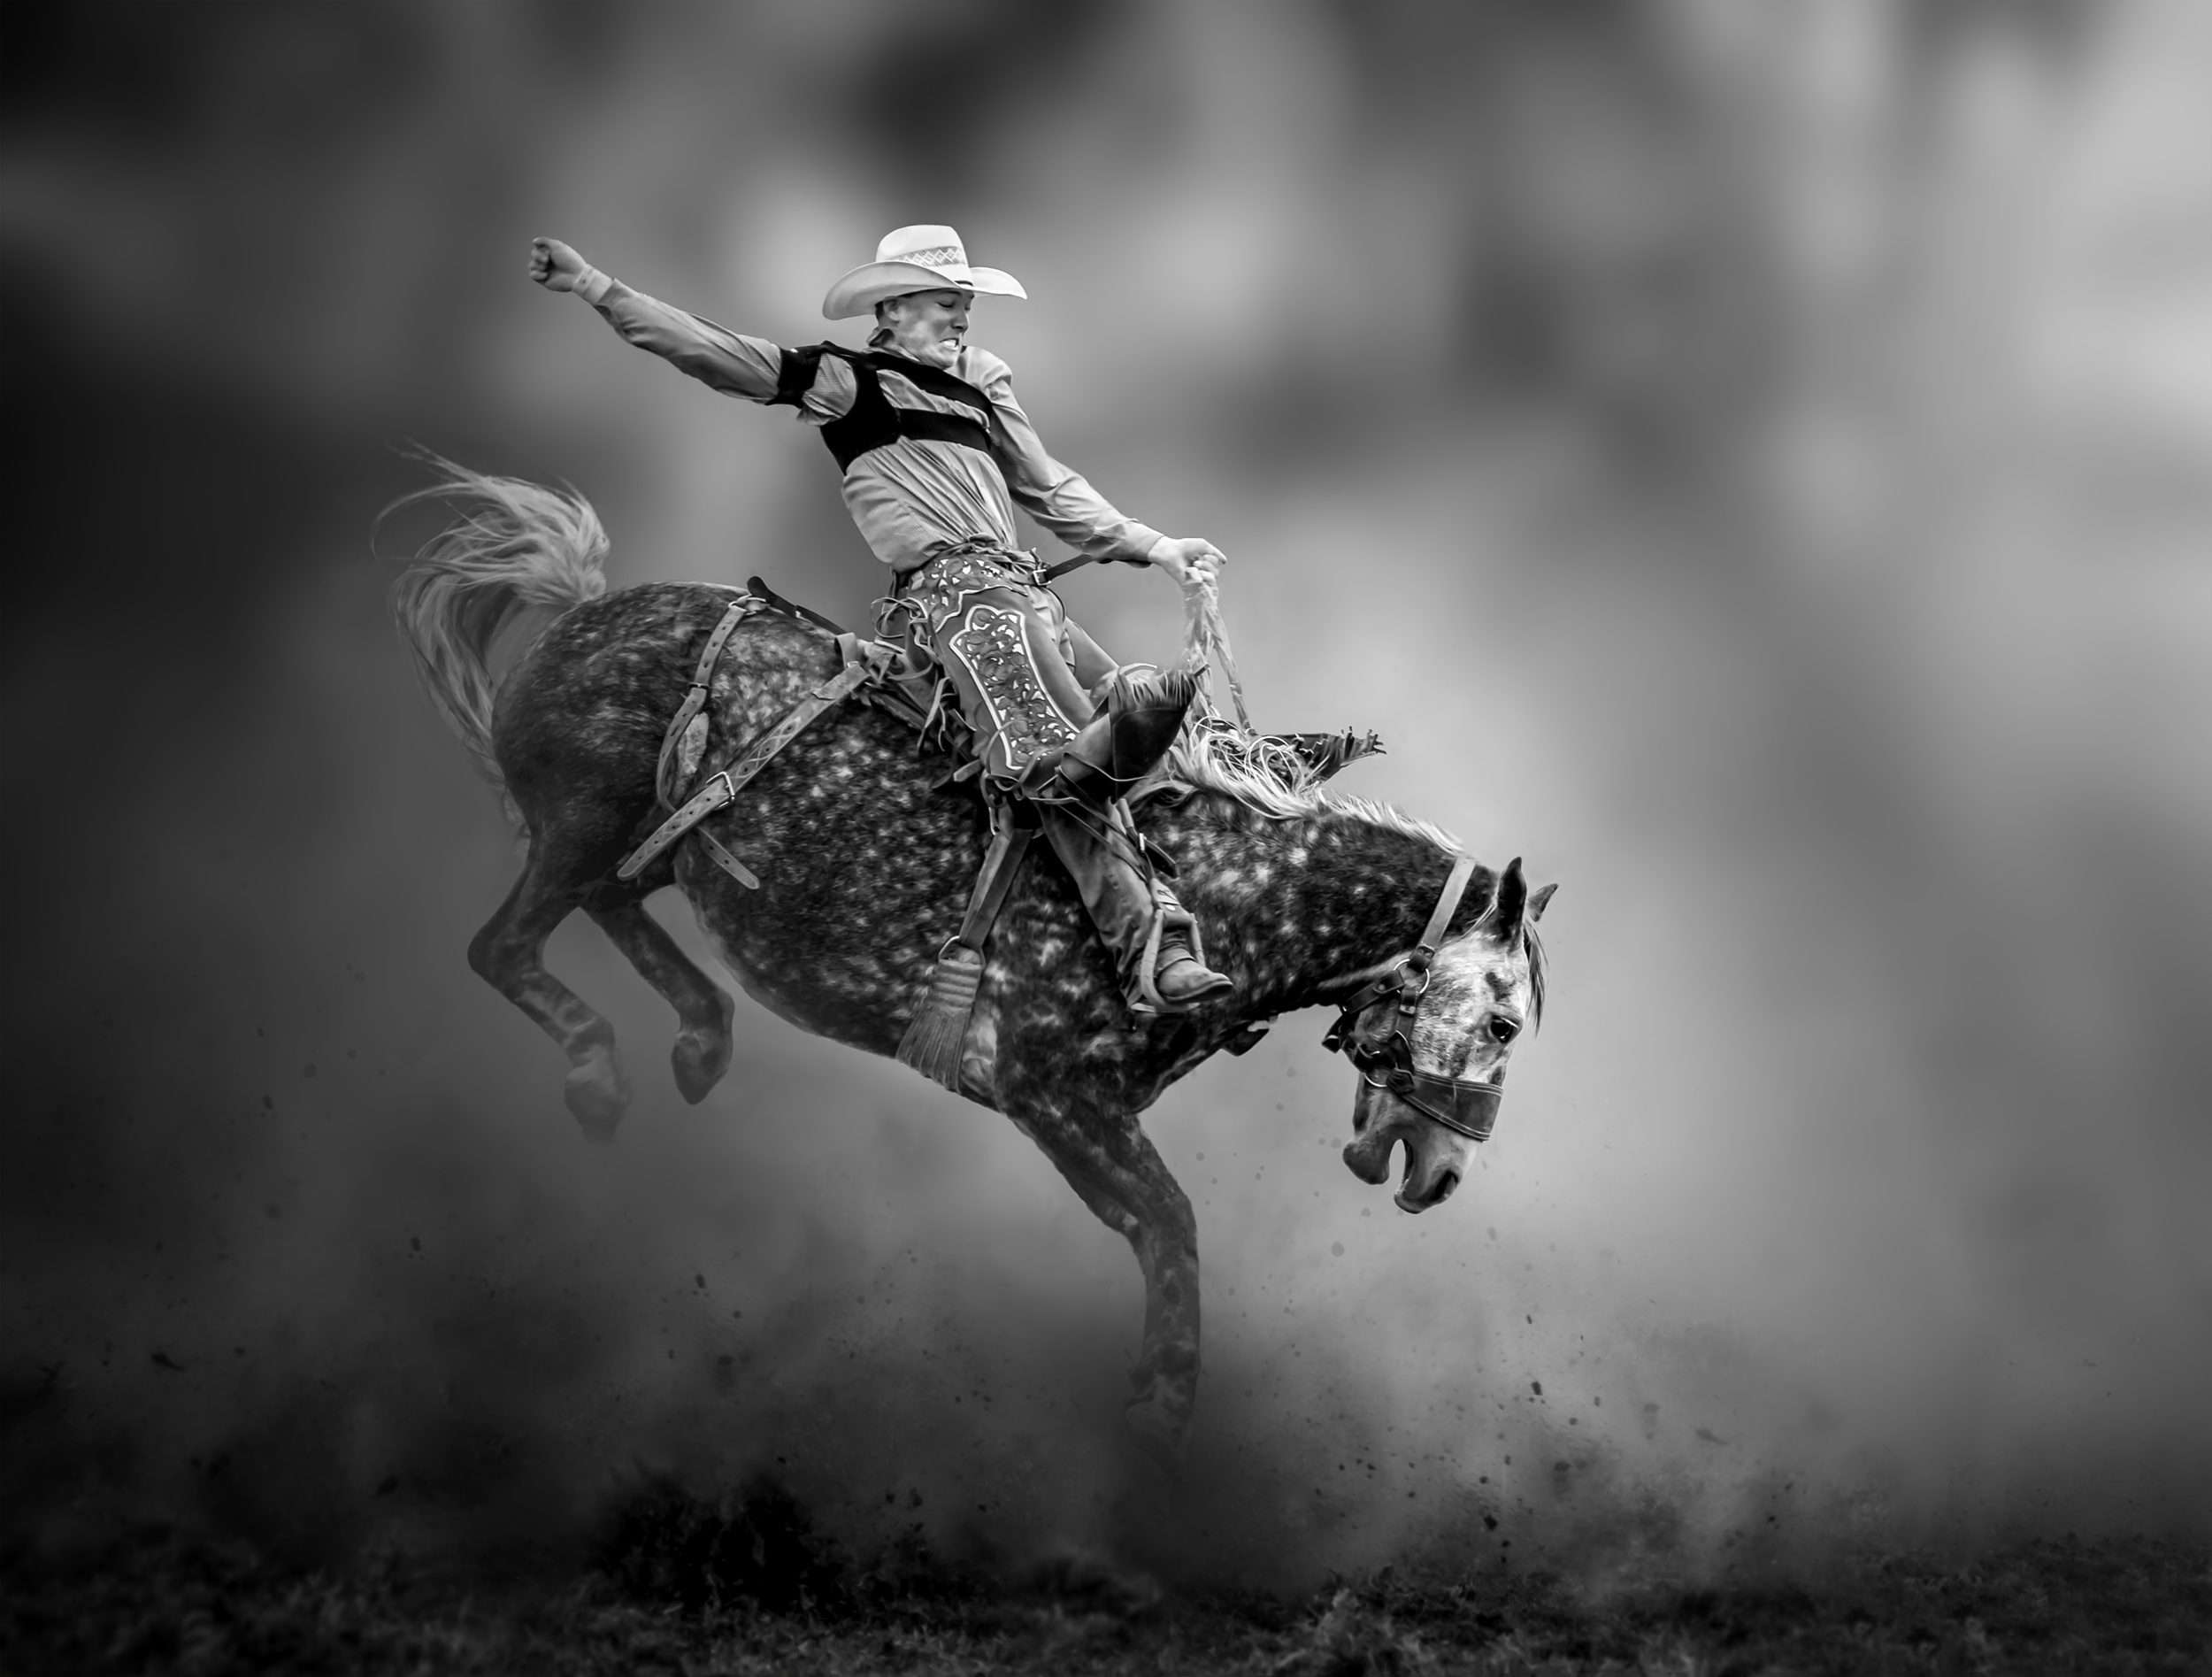 Rodeo: A bucking horse, Cowboy riding a saddle bronc, American West. 2500x1900 HD Wallpaper.